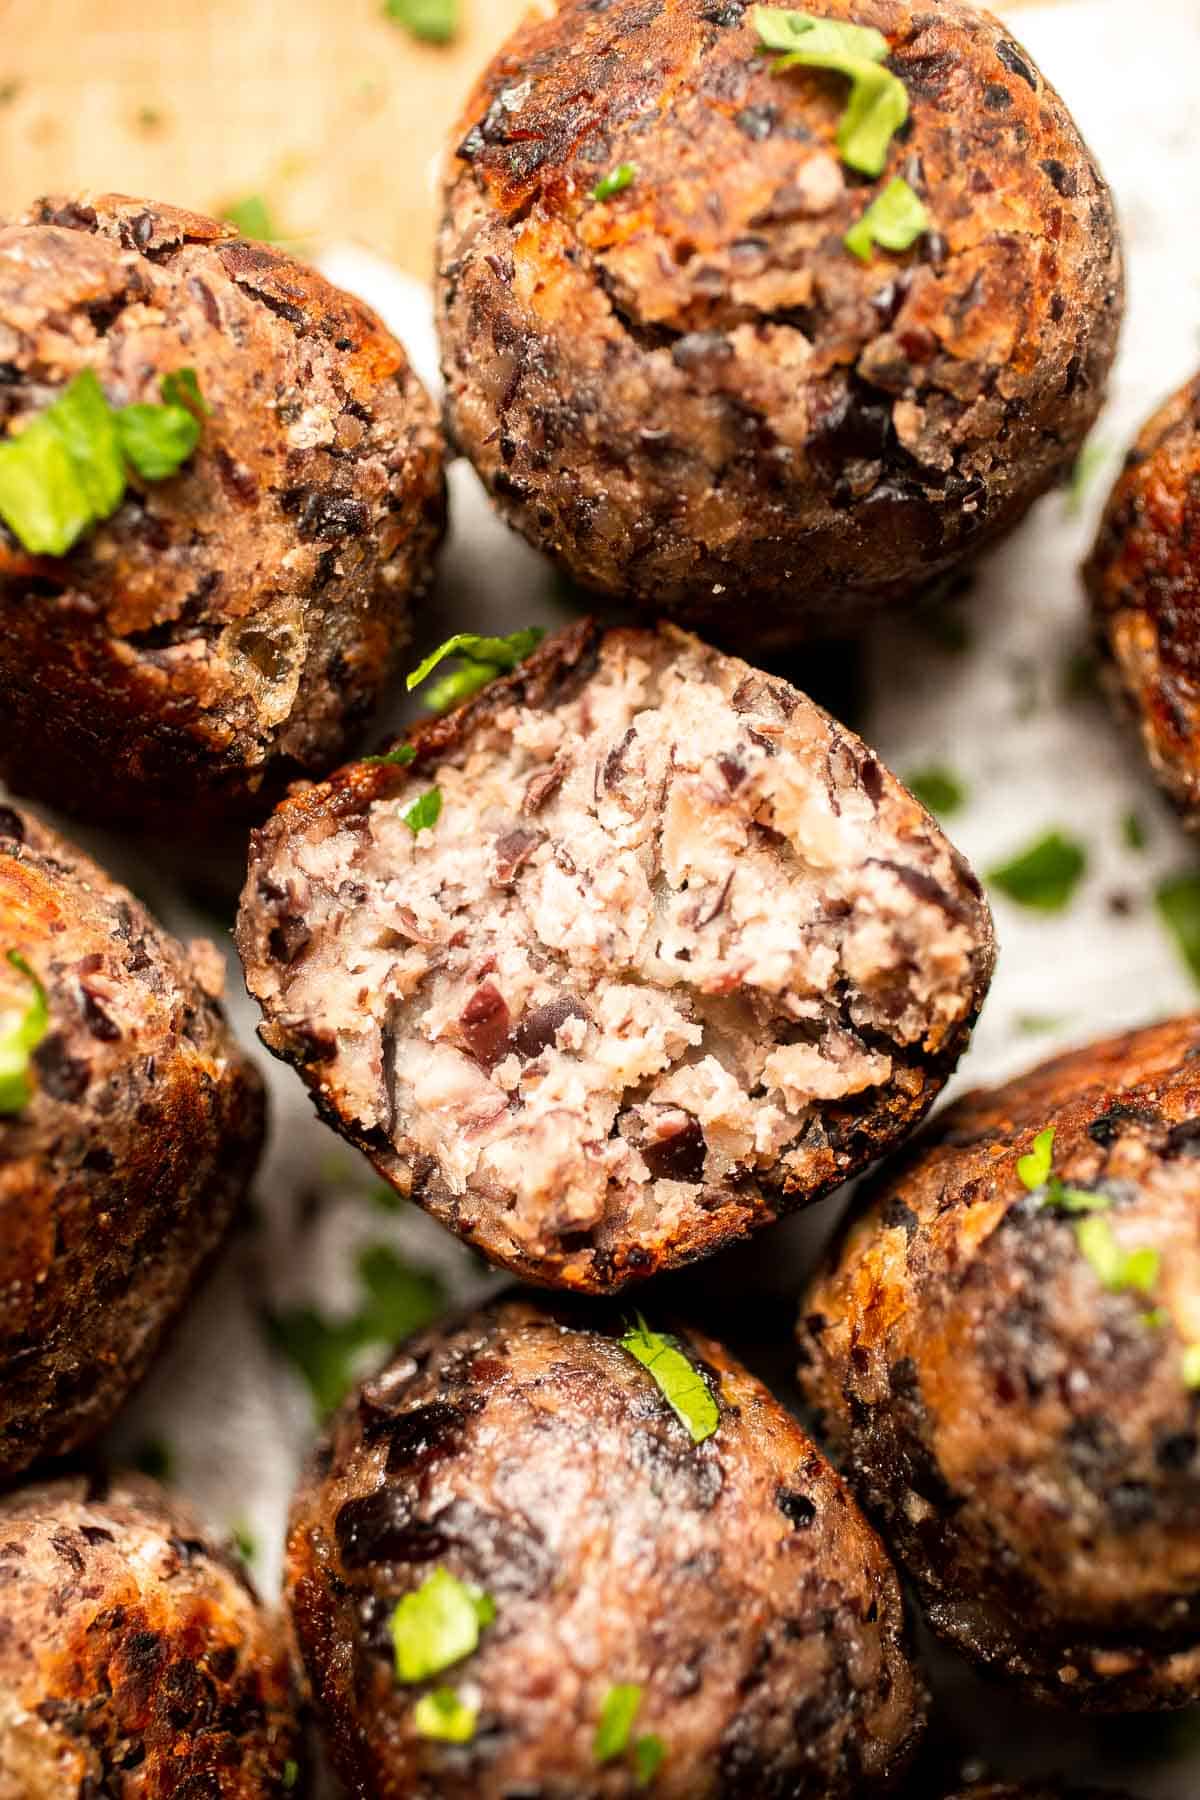 Easy Vegetarian Meatballs are made with cheesy black beans and a mixture of aromatic spices — perfect for adding protein, texture, and flavor to your meal. | aheadofthyme.com